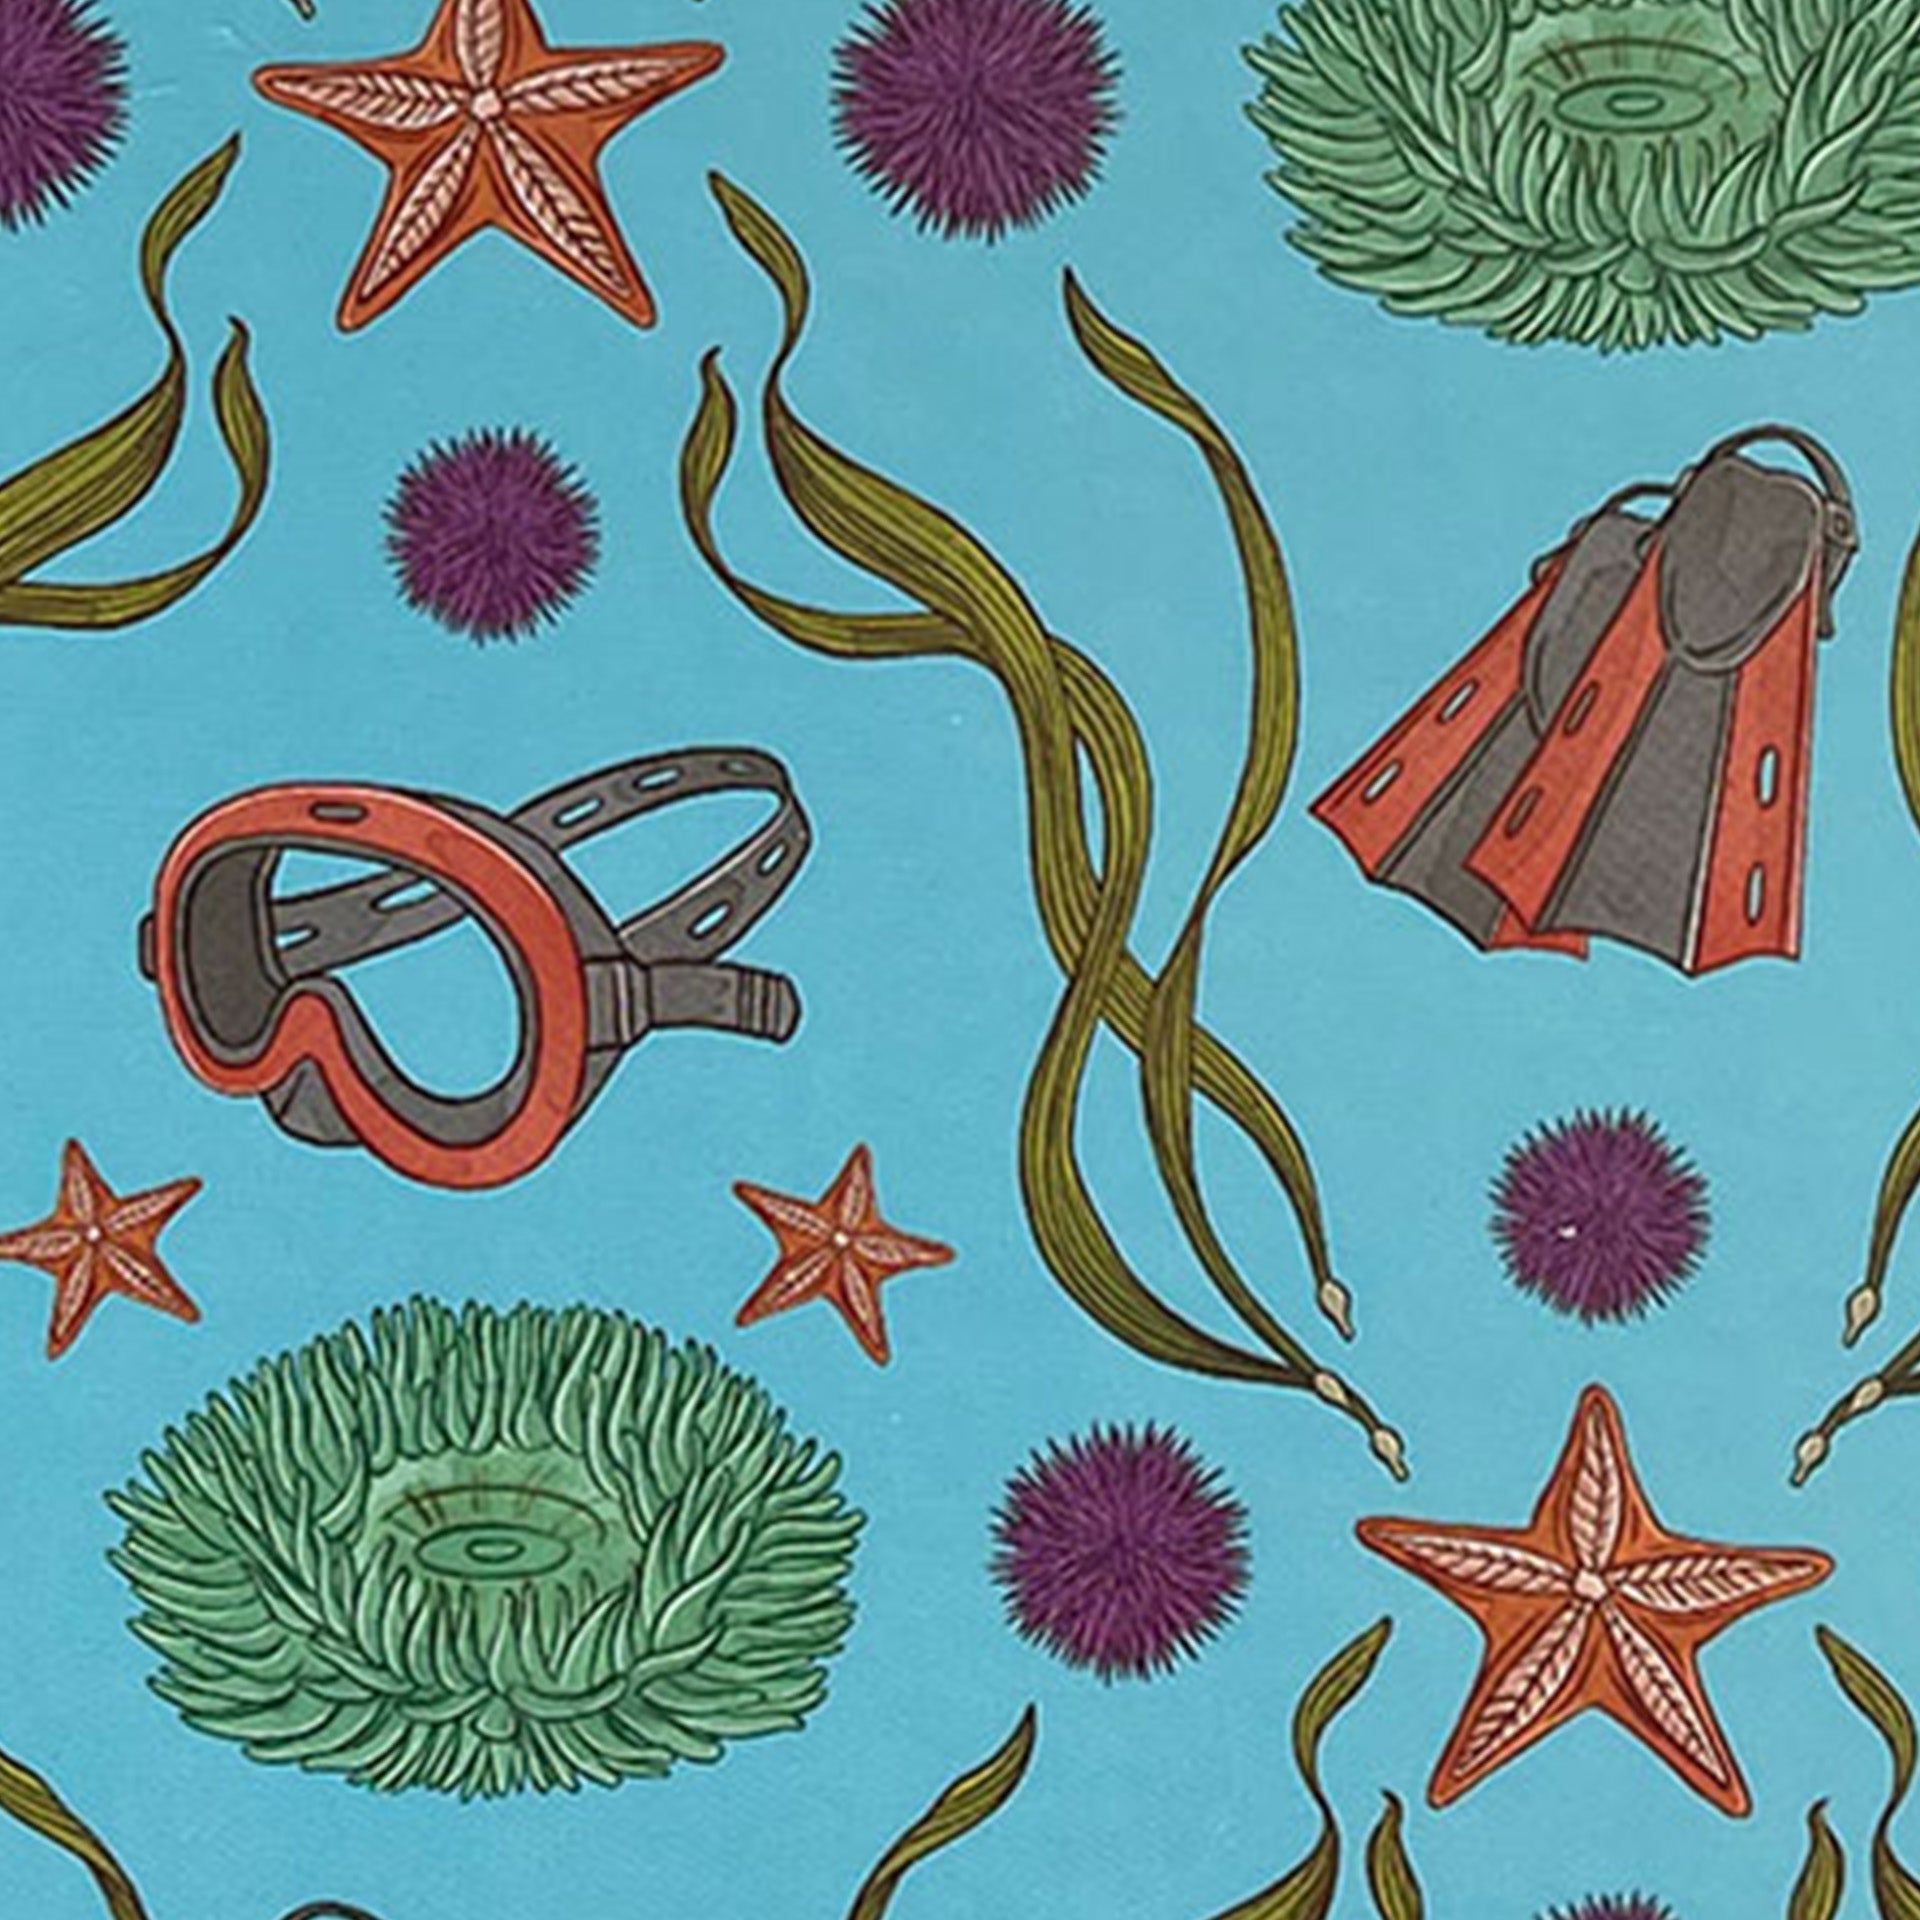 Closeup of snorkeling gear and sea urchins printed on blue